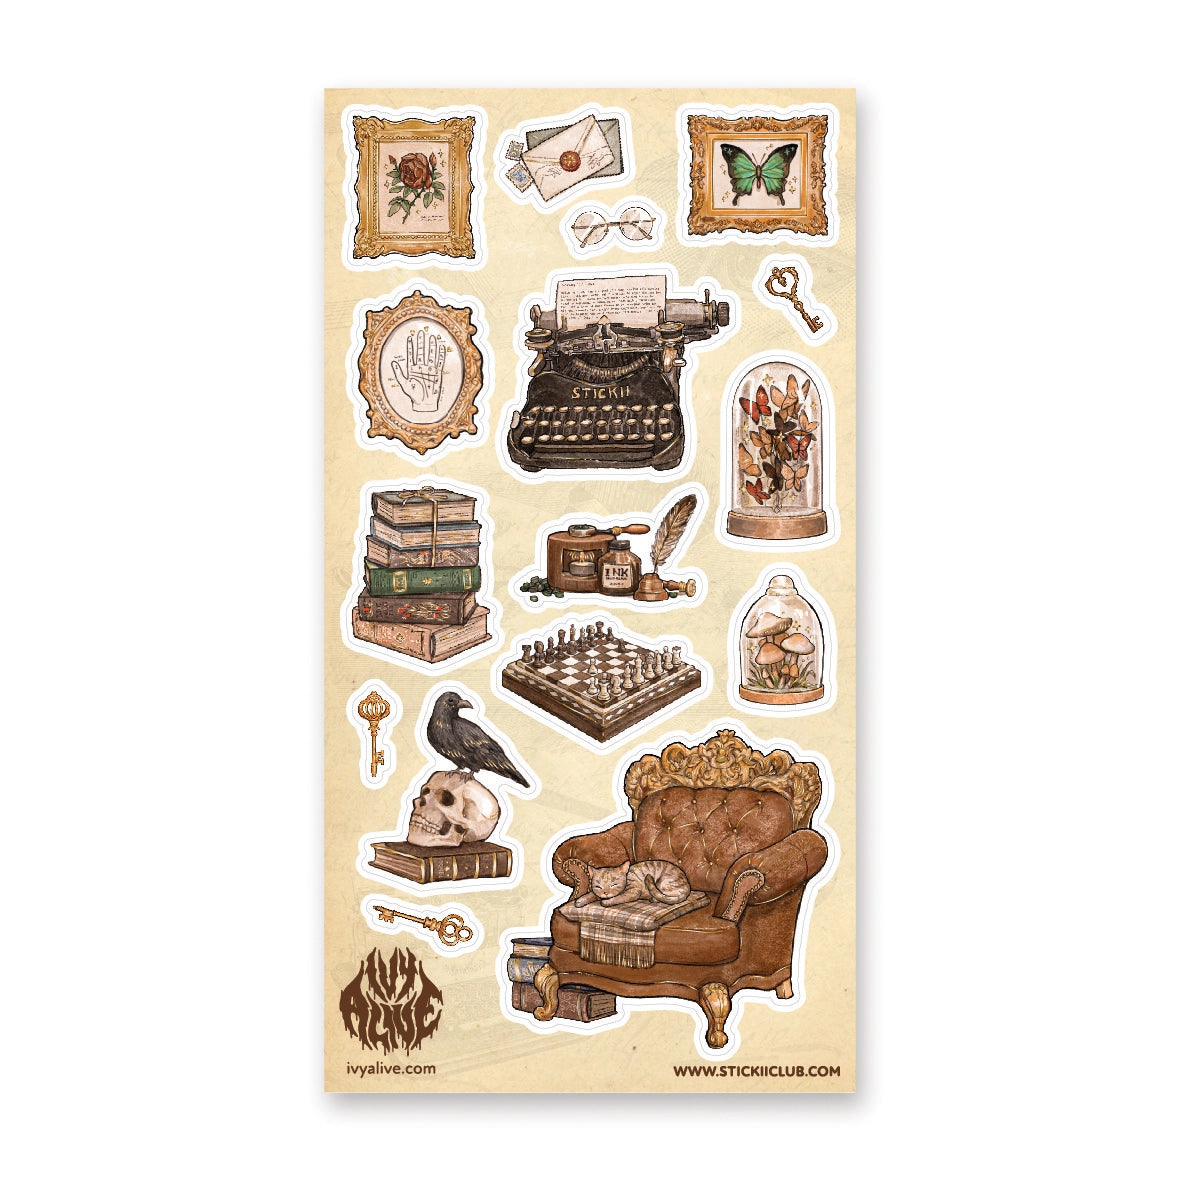 Quoth the Raven Sticker Sheets {multiple styles}